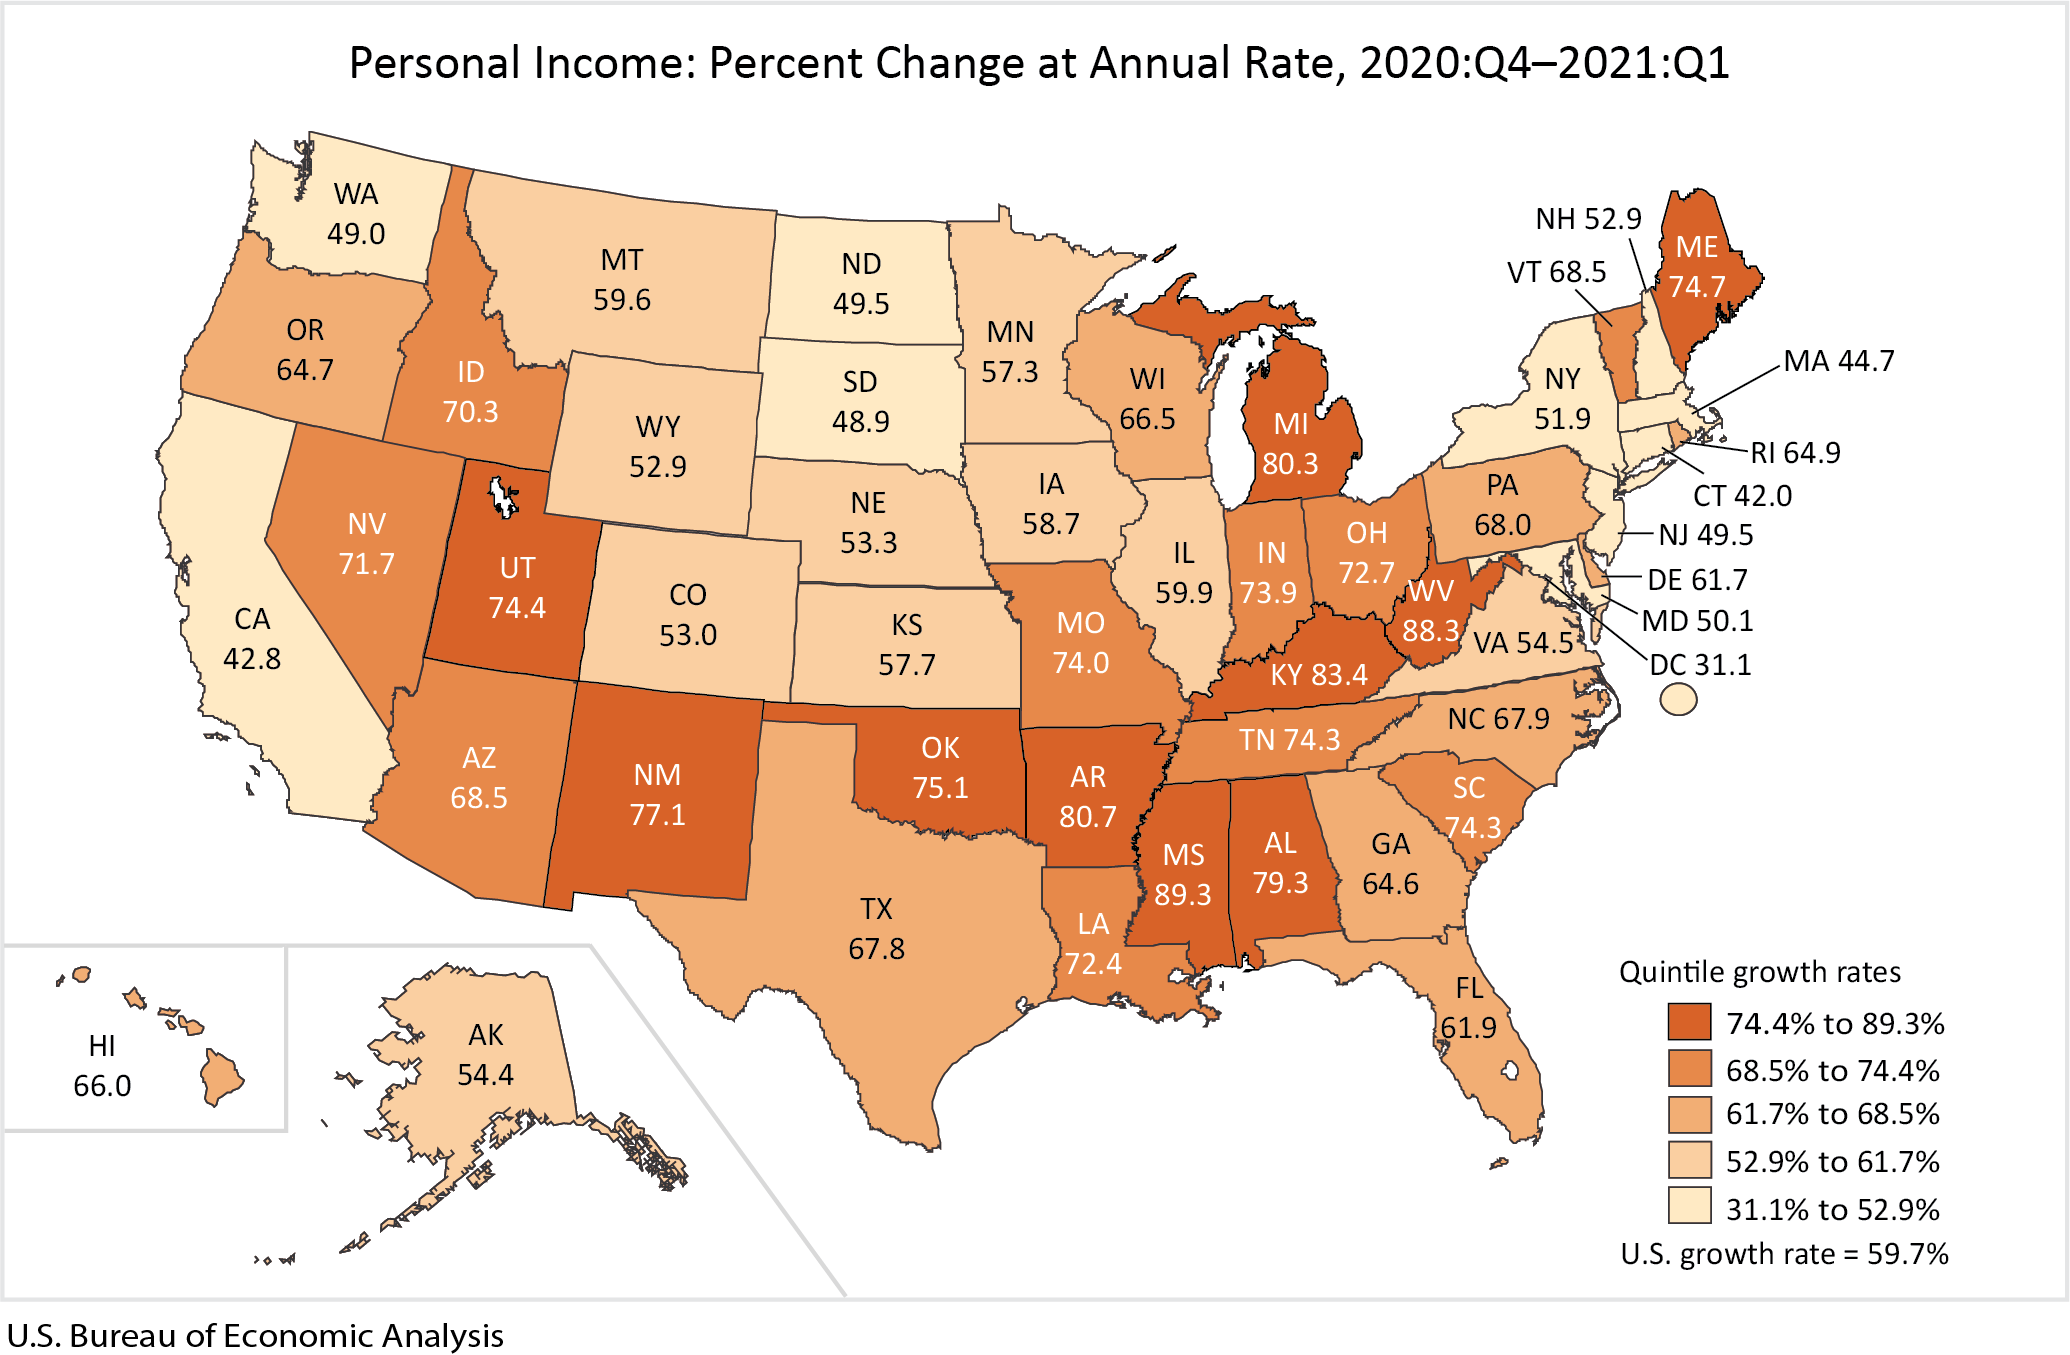 Personal Income: Percent Change at Annual Rate, 2020:Q4-2021:Q1